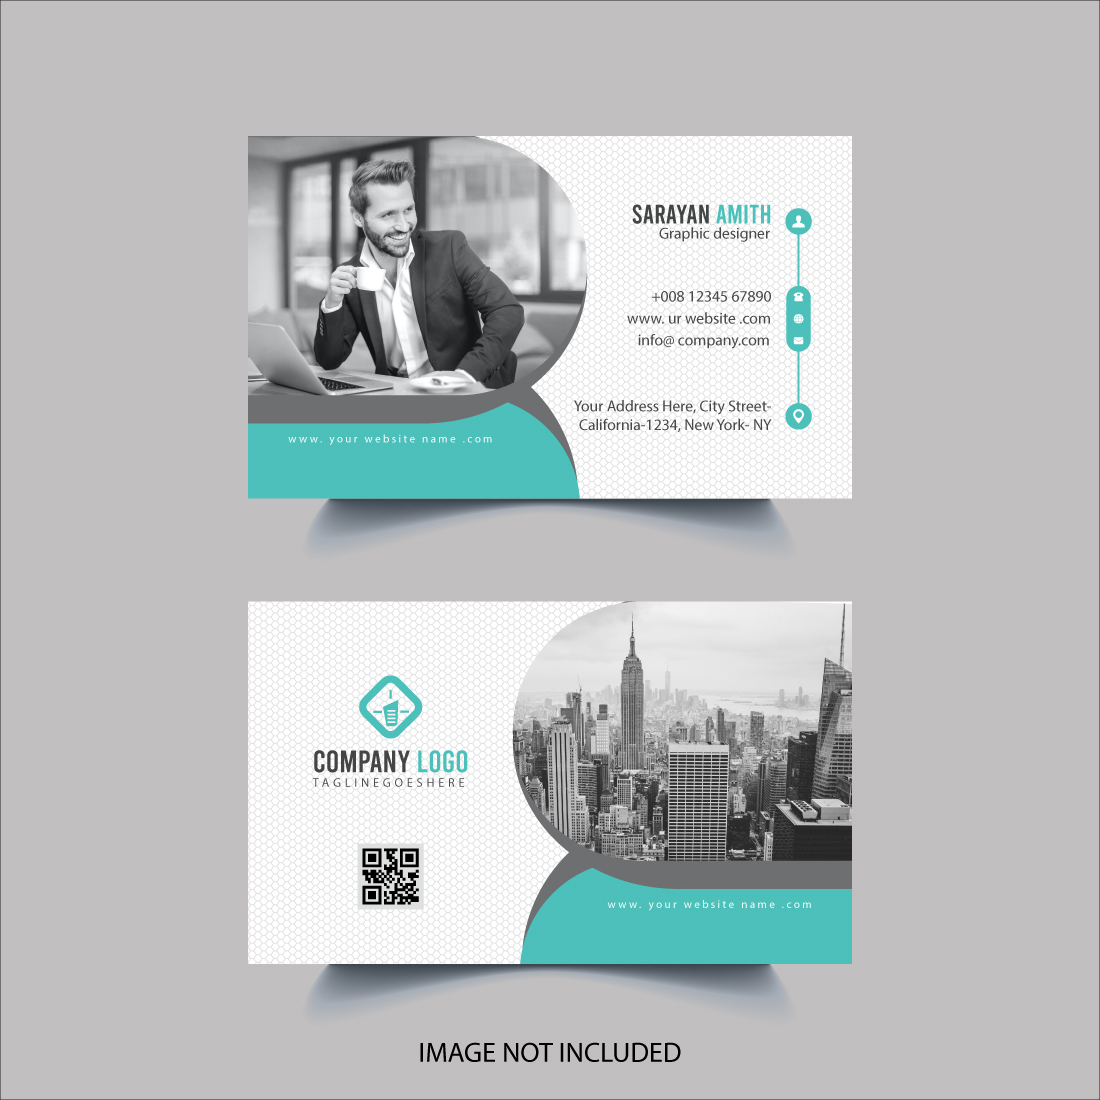 Set of two business cards with a photo of a man in a suit.